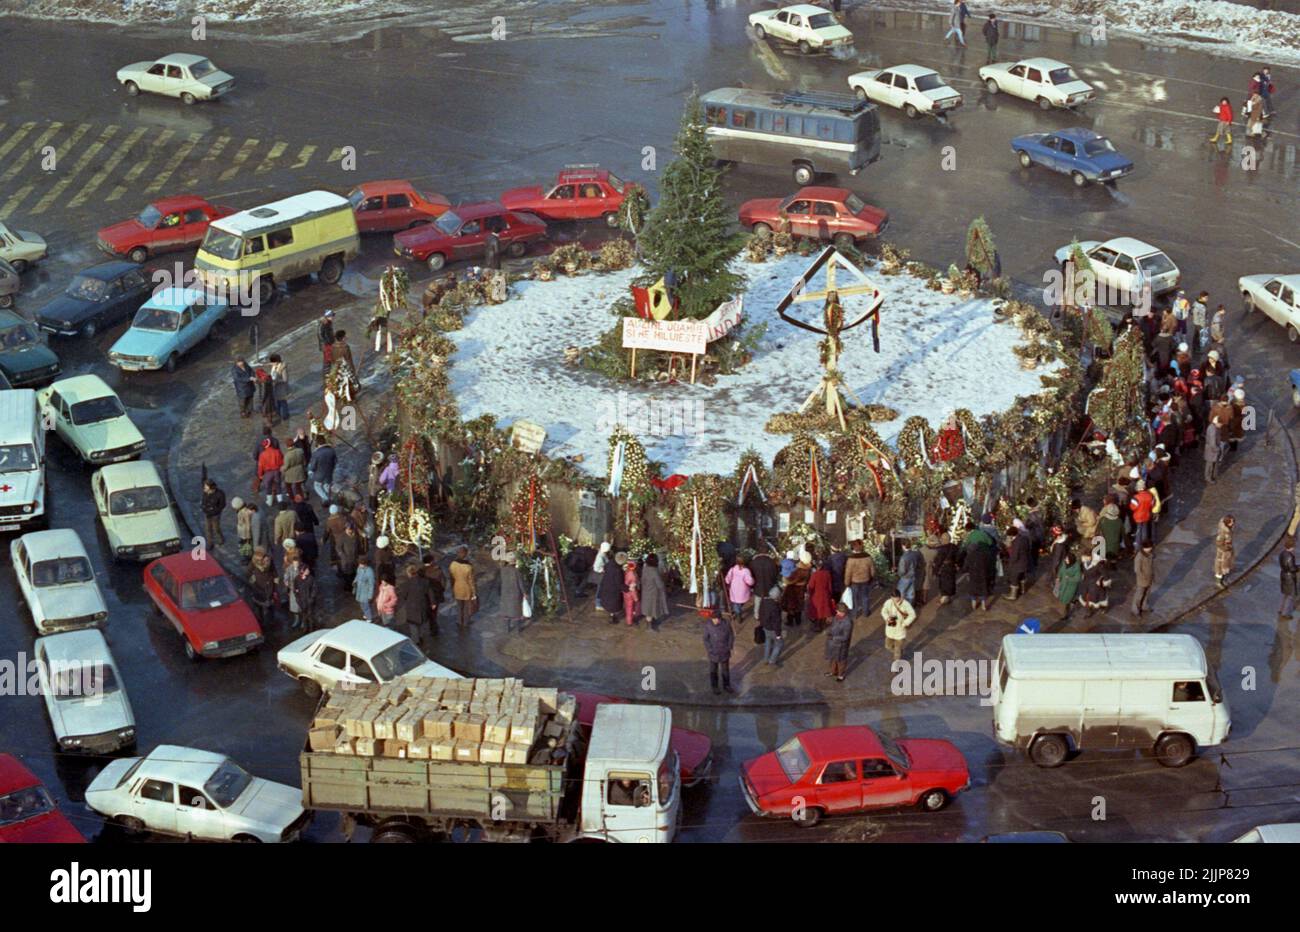 Bucharest, Romania, January 1990. Memorial for the victims of the Romanian anticommunist revolution of December 1989 in the center of the University Square, one of the key points in the uprising. People gathered daily in the weeks following the event, to lay flowers, lit up candles, and pray. Stock Photo